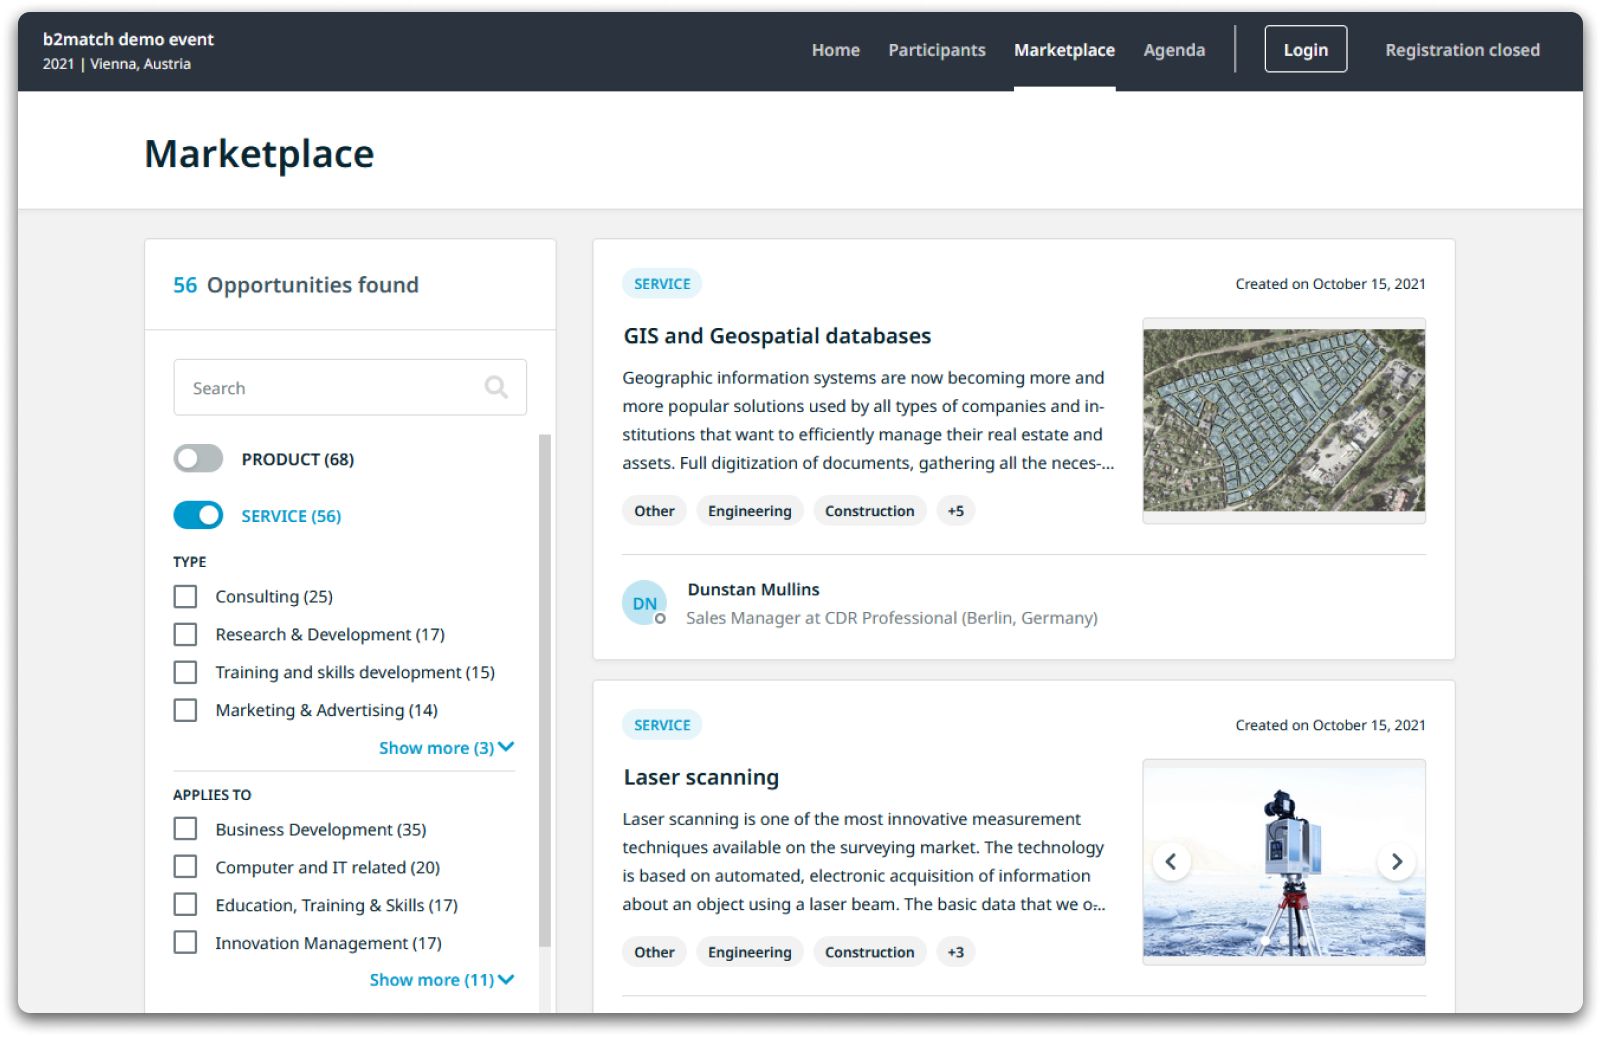 Image: Marketplace opportunities with keywords and smart search function.